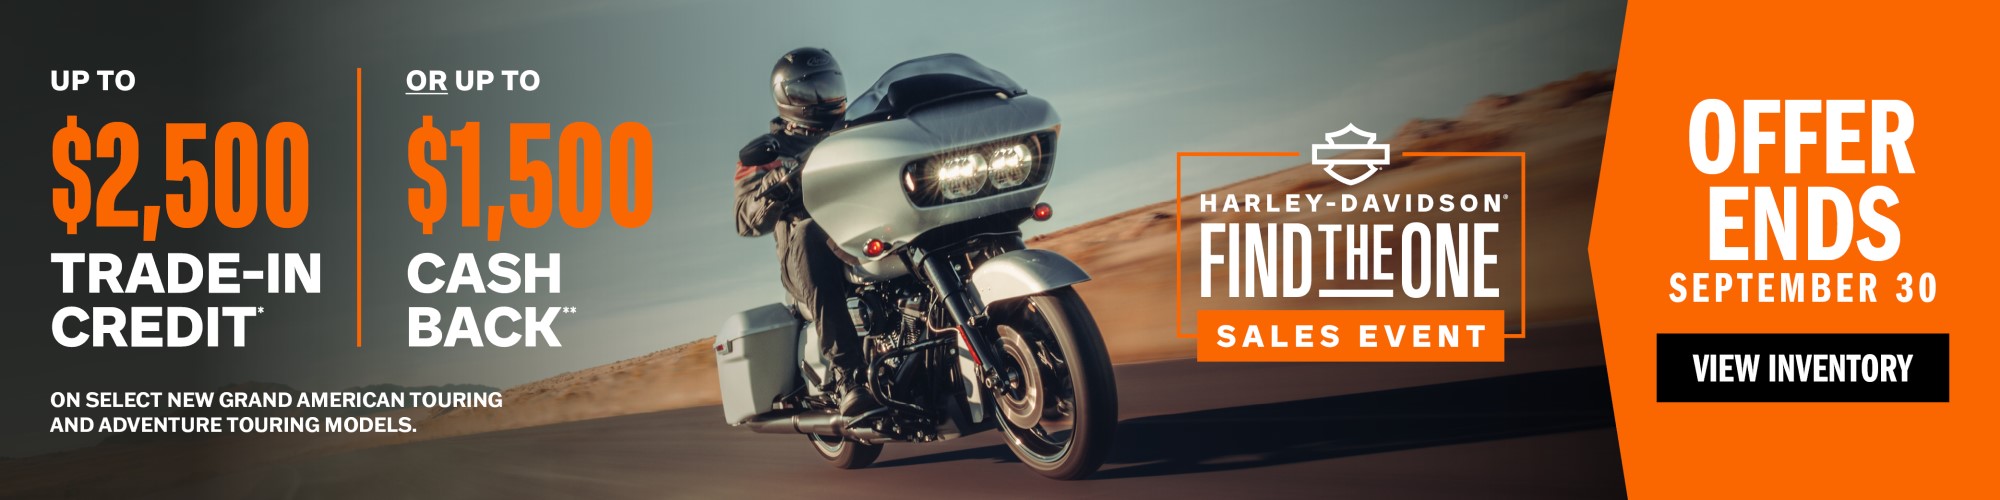 Find the One - 202319 at Harley-Davidson of Dothan